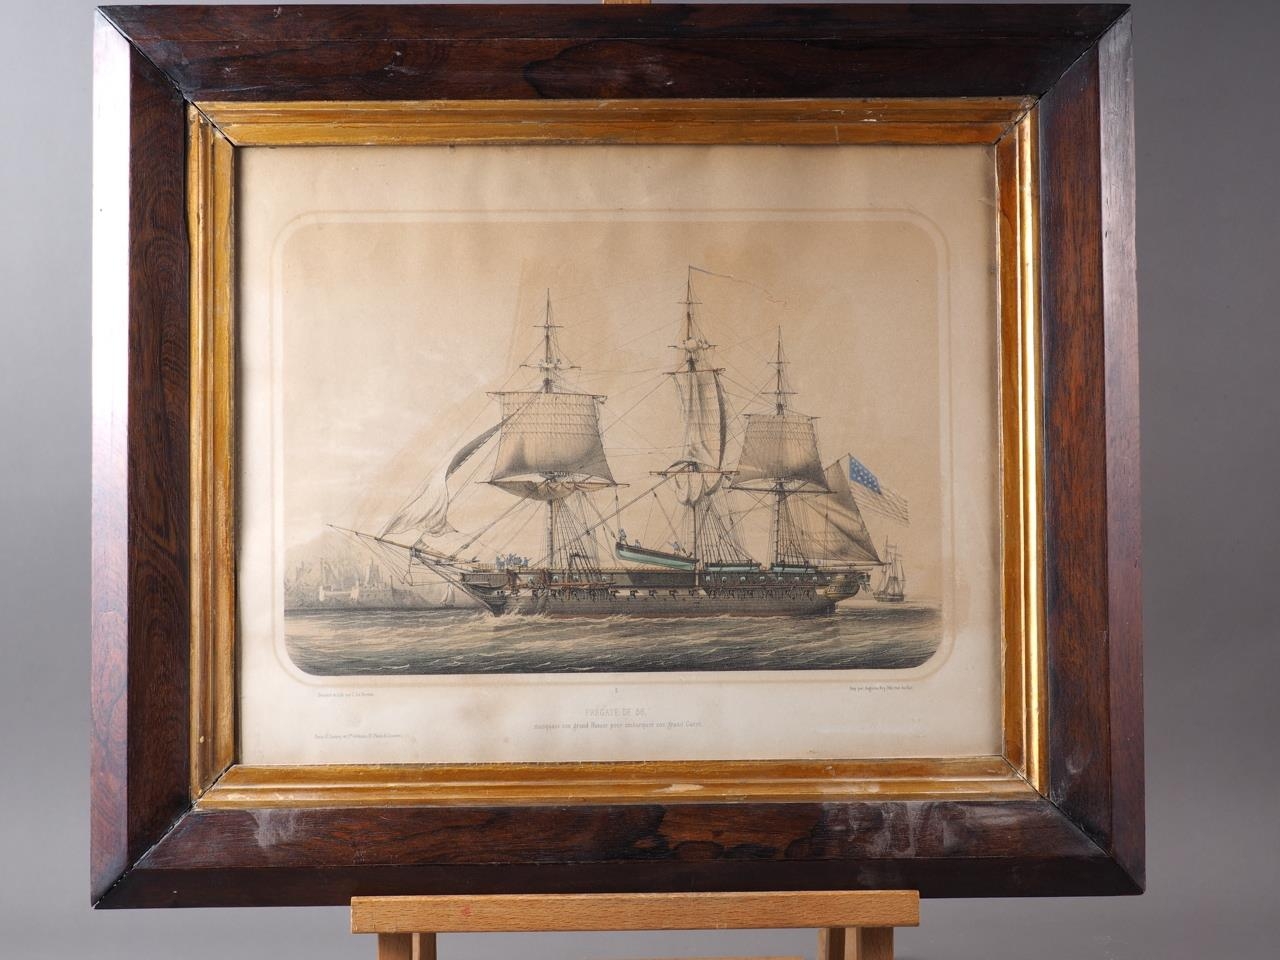 T Burford: an 18th century hand coloured mezzotint, "A squadron at anchor are preparing to sail", in - Image 3 of 4